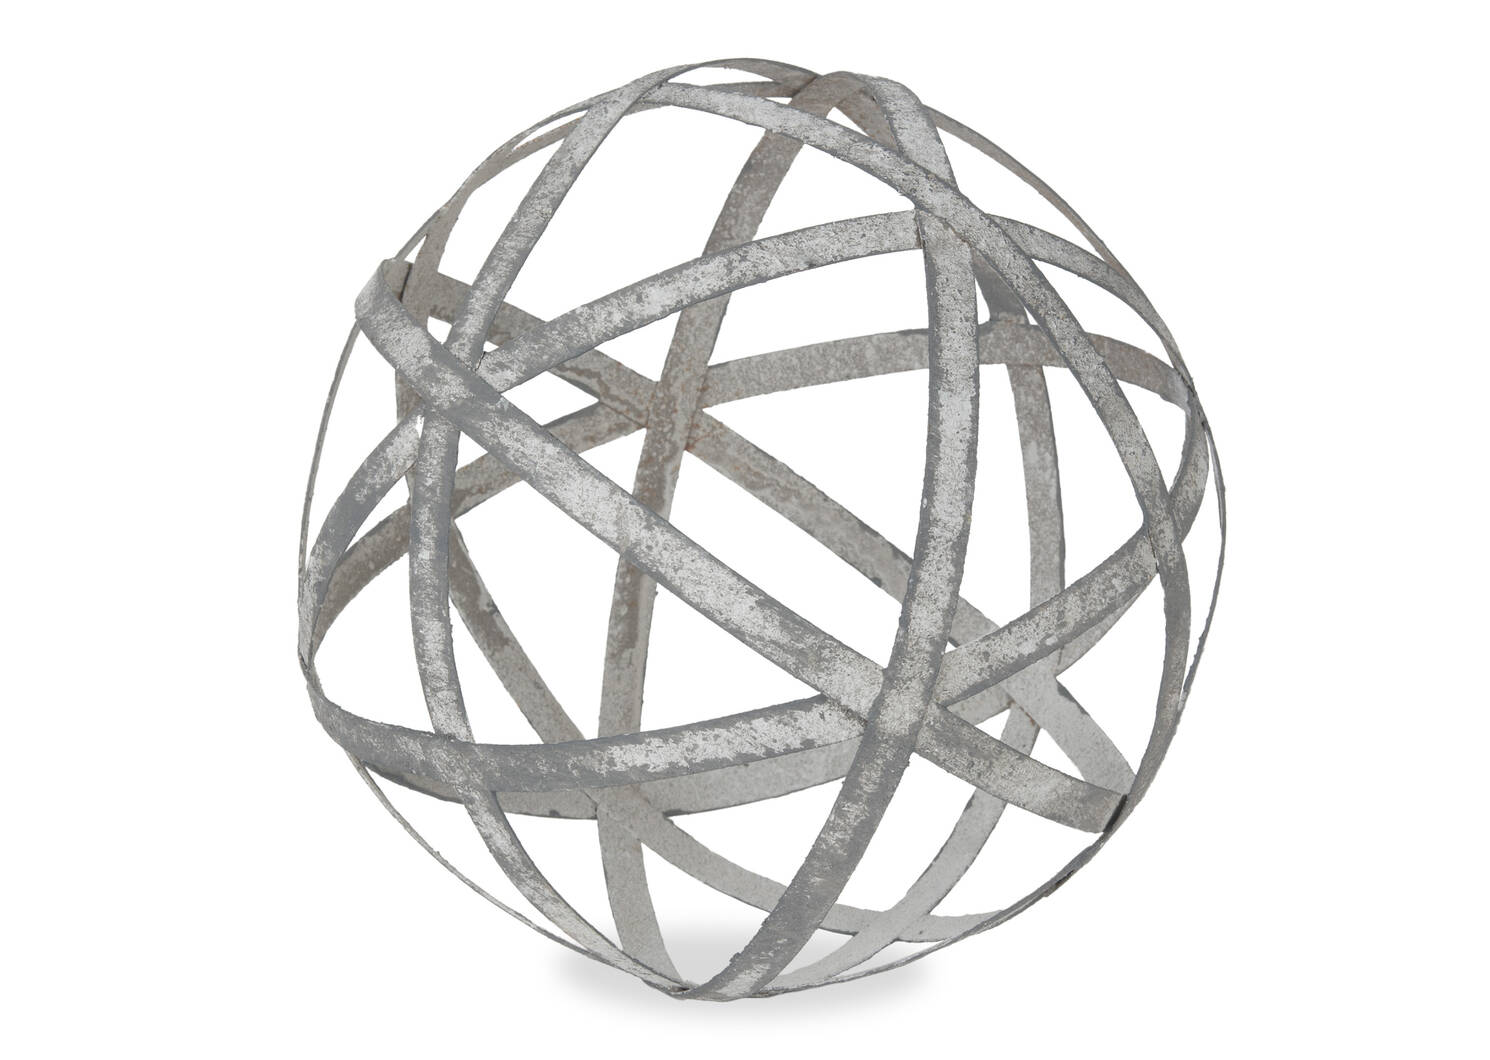 Romilly Decor Ball Large